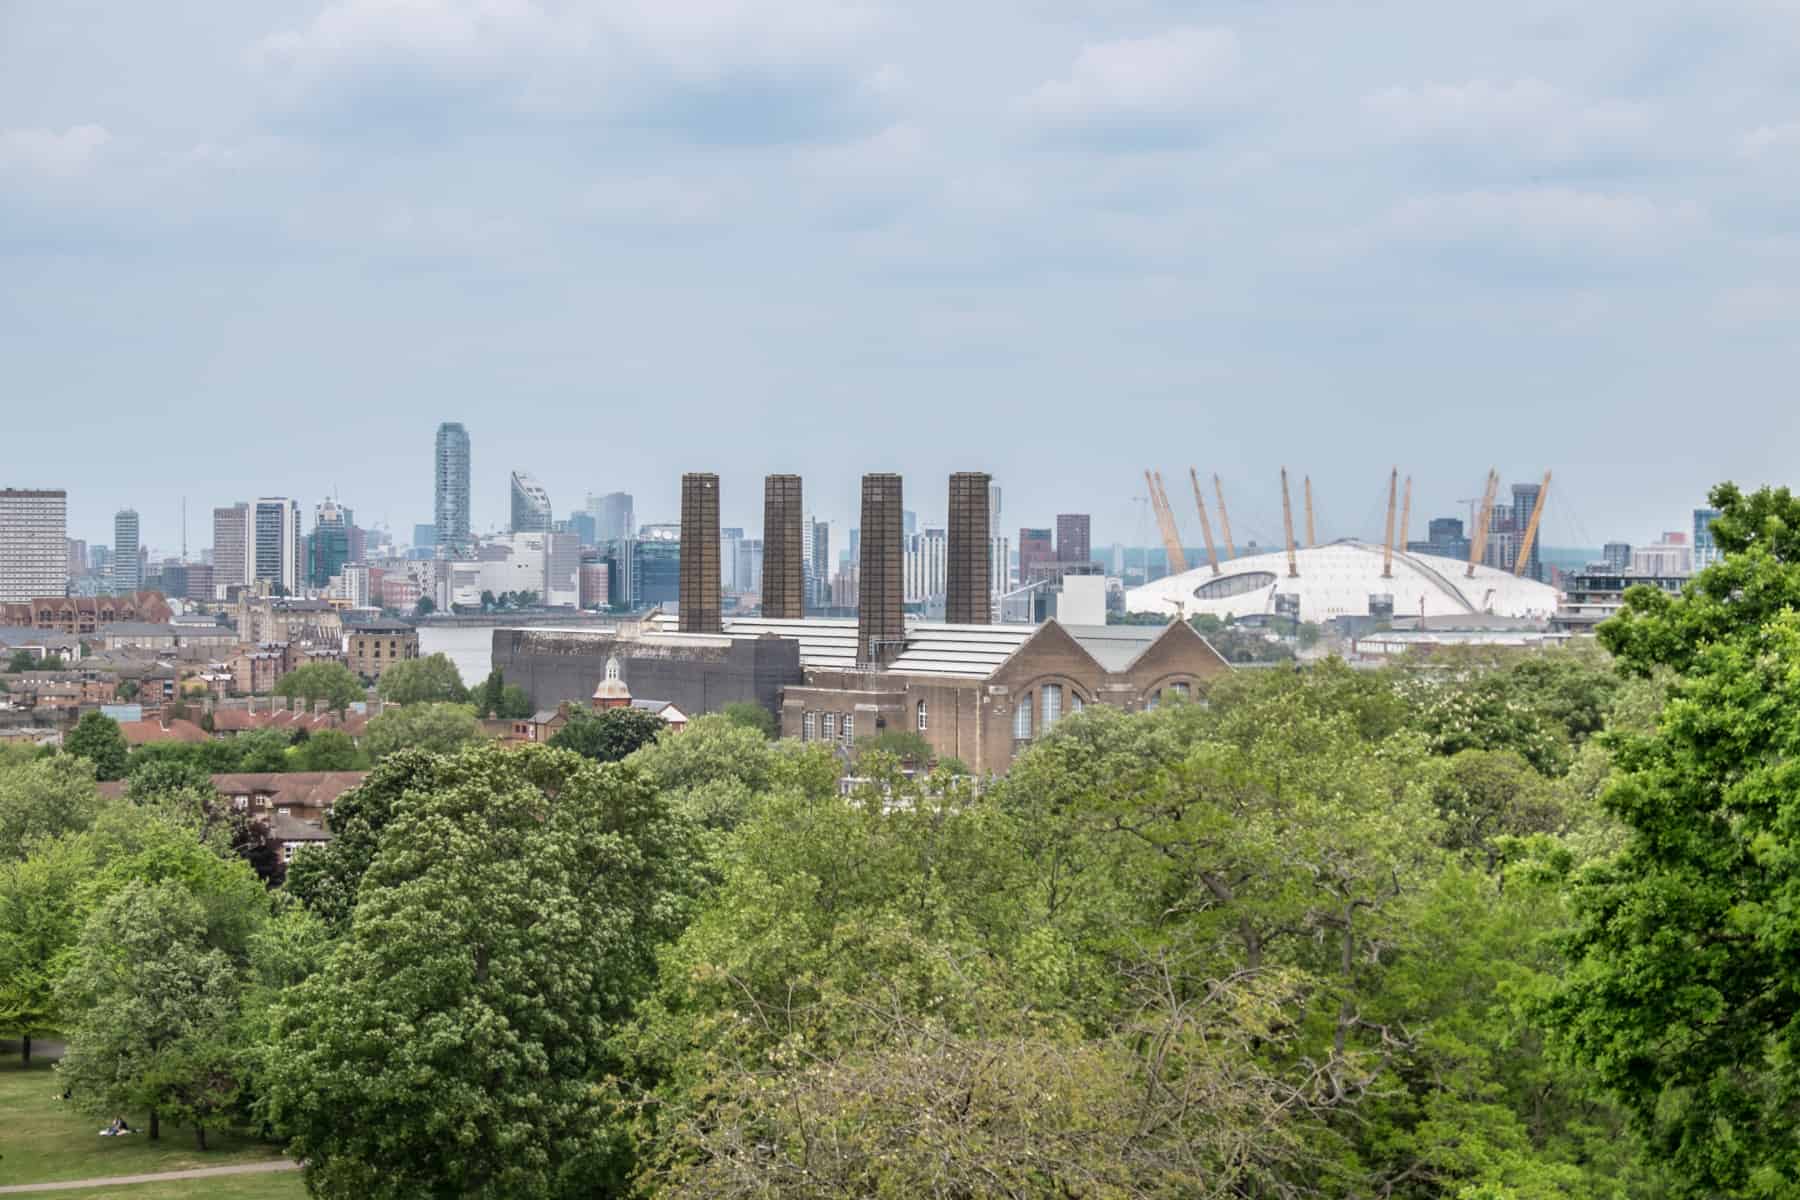 A view to the North Greenwich Peninsula and the white dome O2 Arena with yellow towers, behind an old chimney factory building.